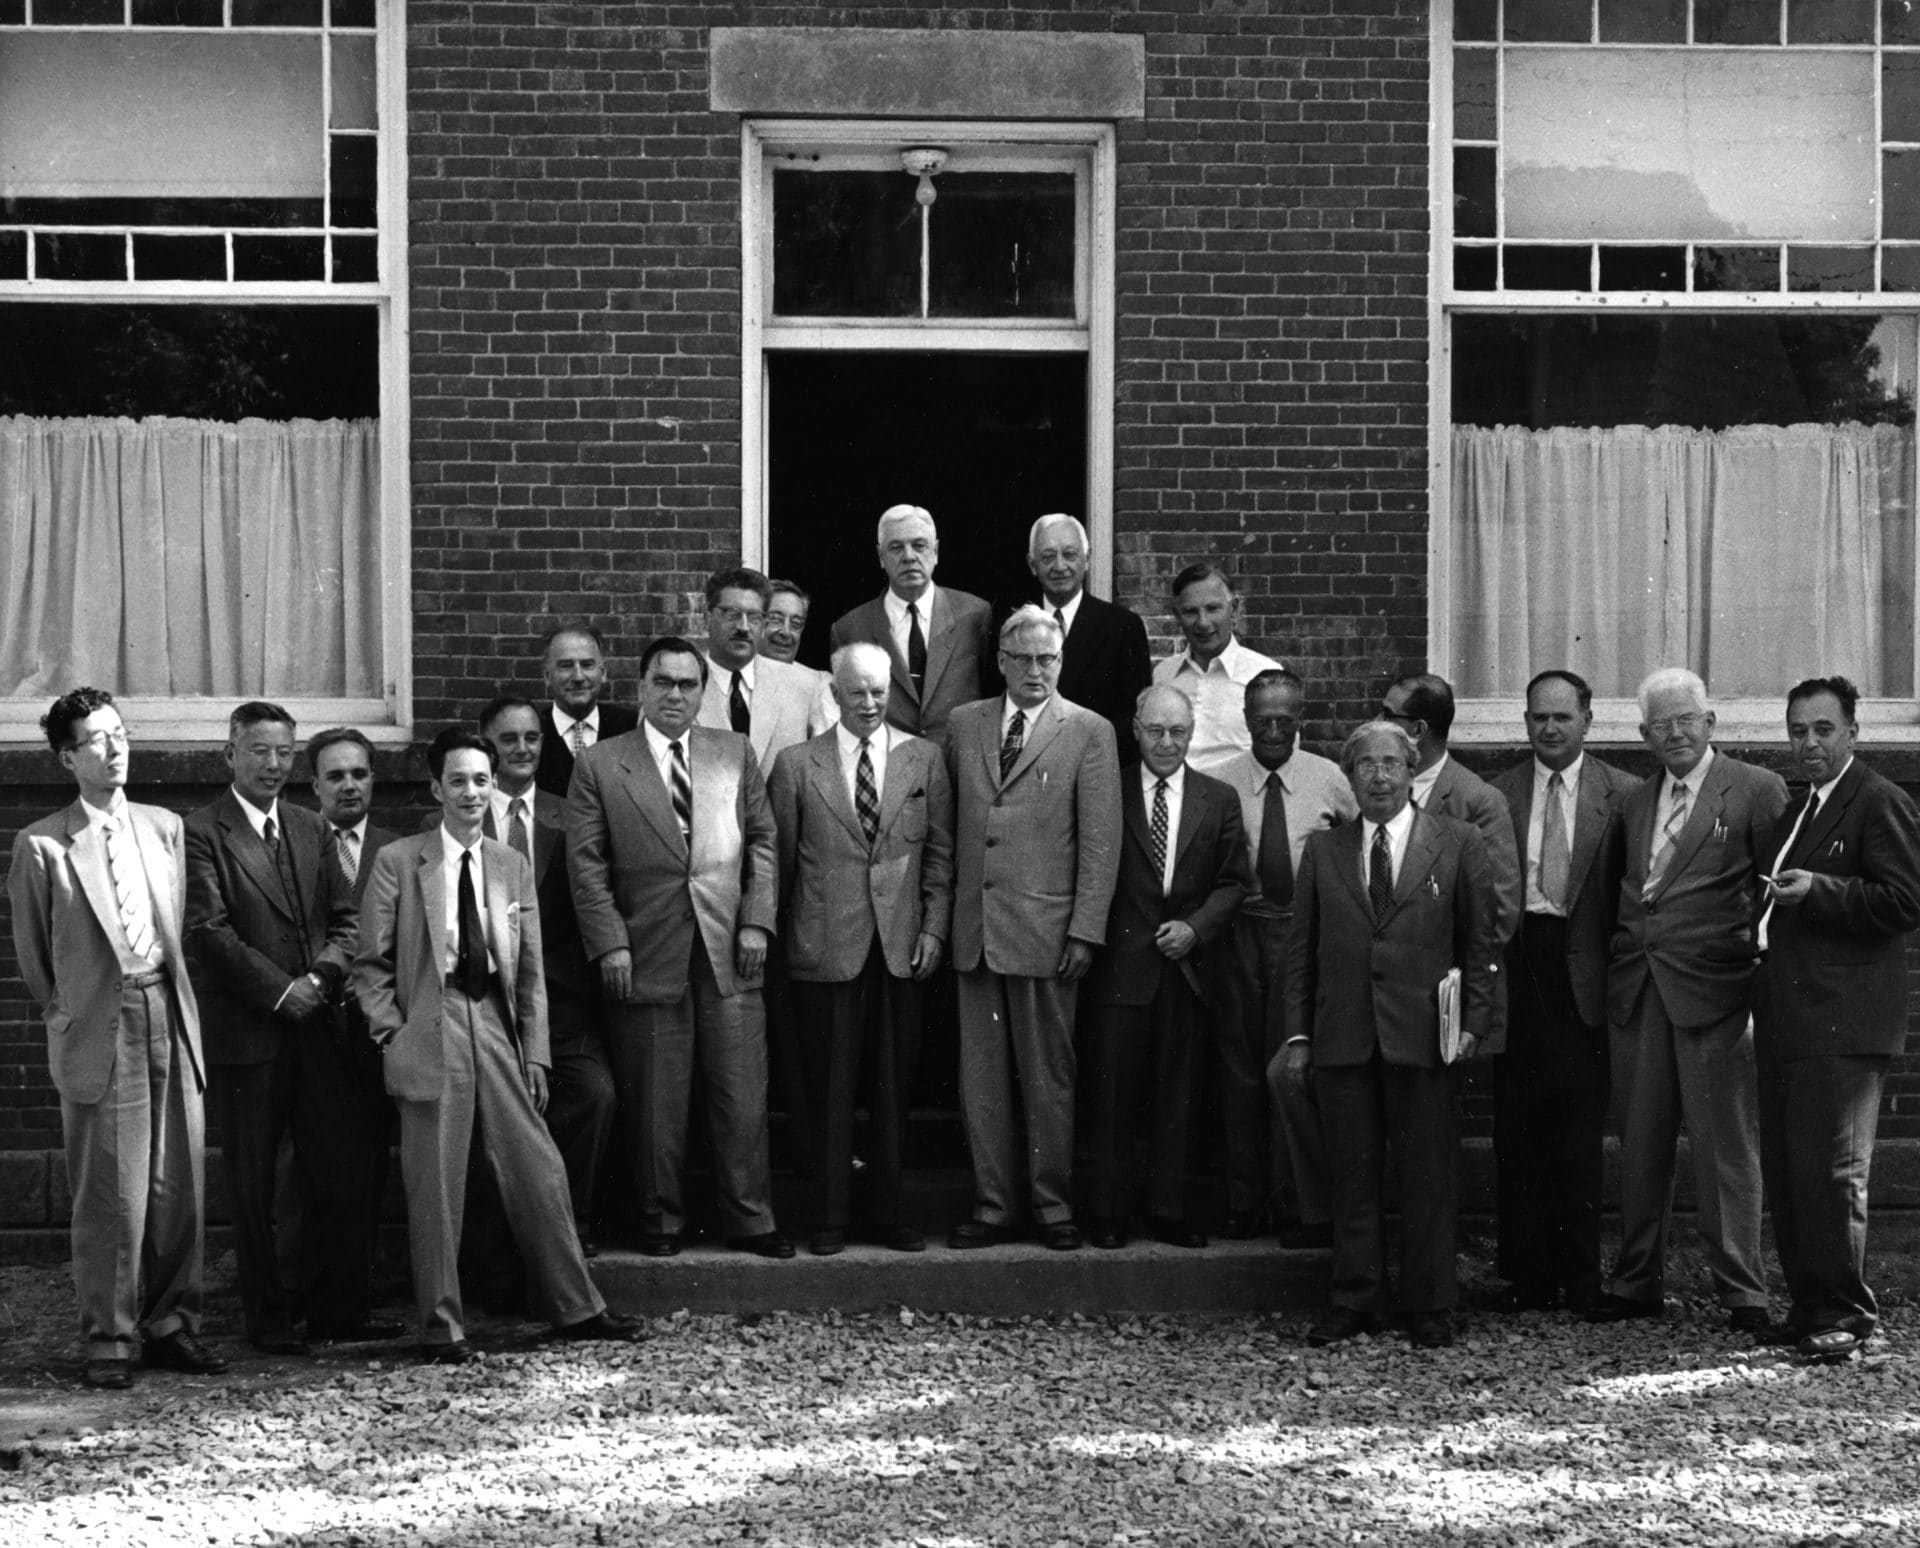 Participants of the First Pugwash Conference